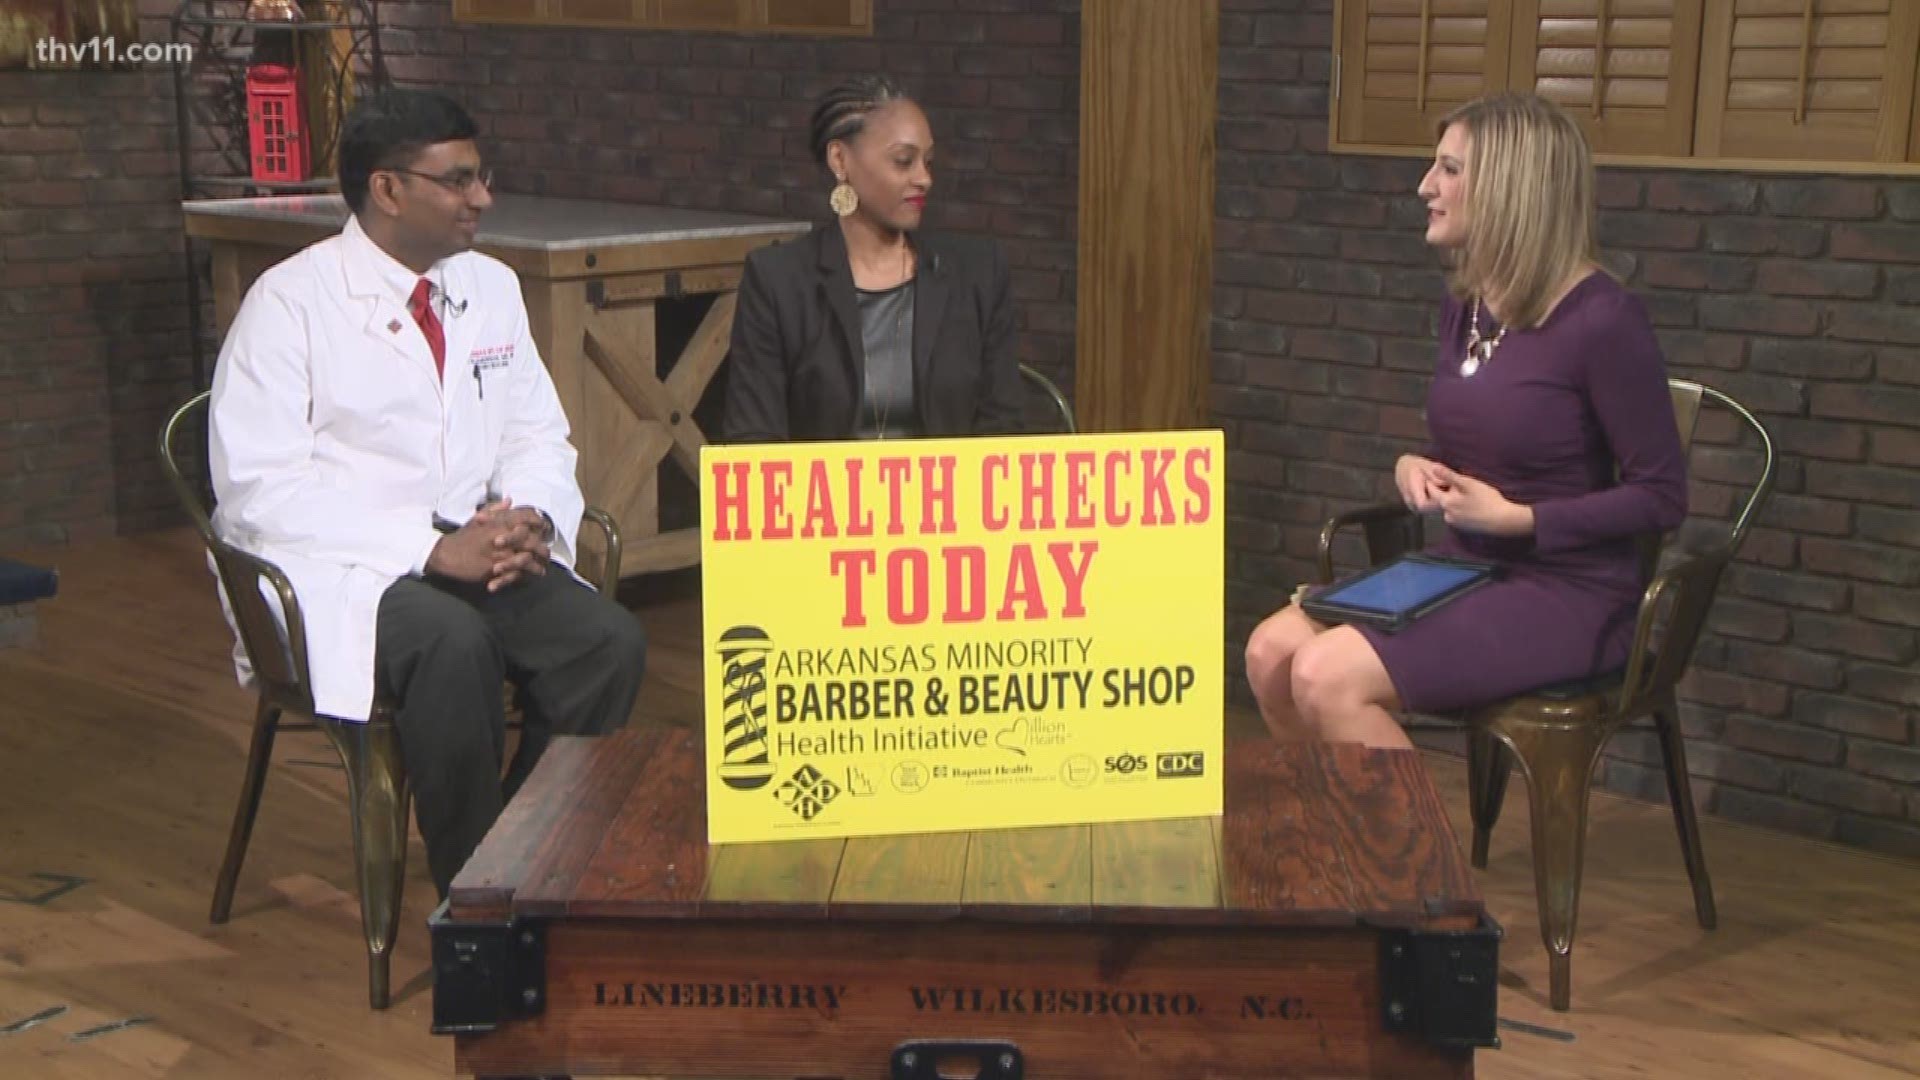 The 6th annual Minority and Beauty Shop Health initiative is April 21. People can go to several shops to be screened for issues like heart disease and stroke.